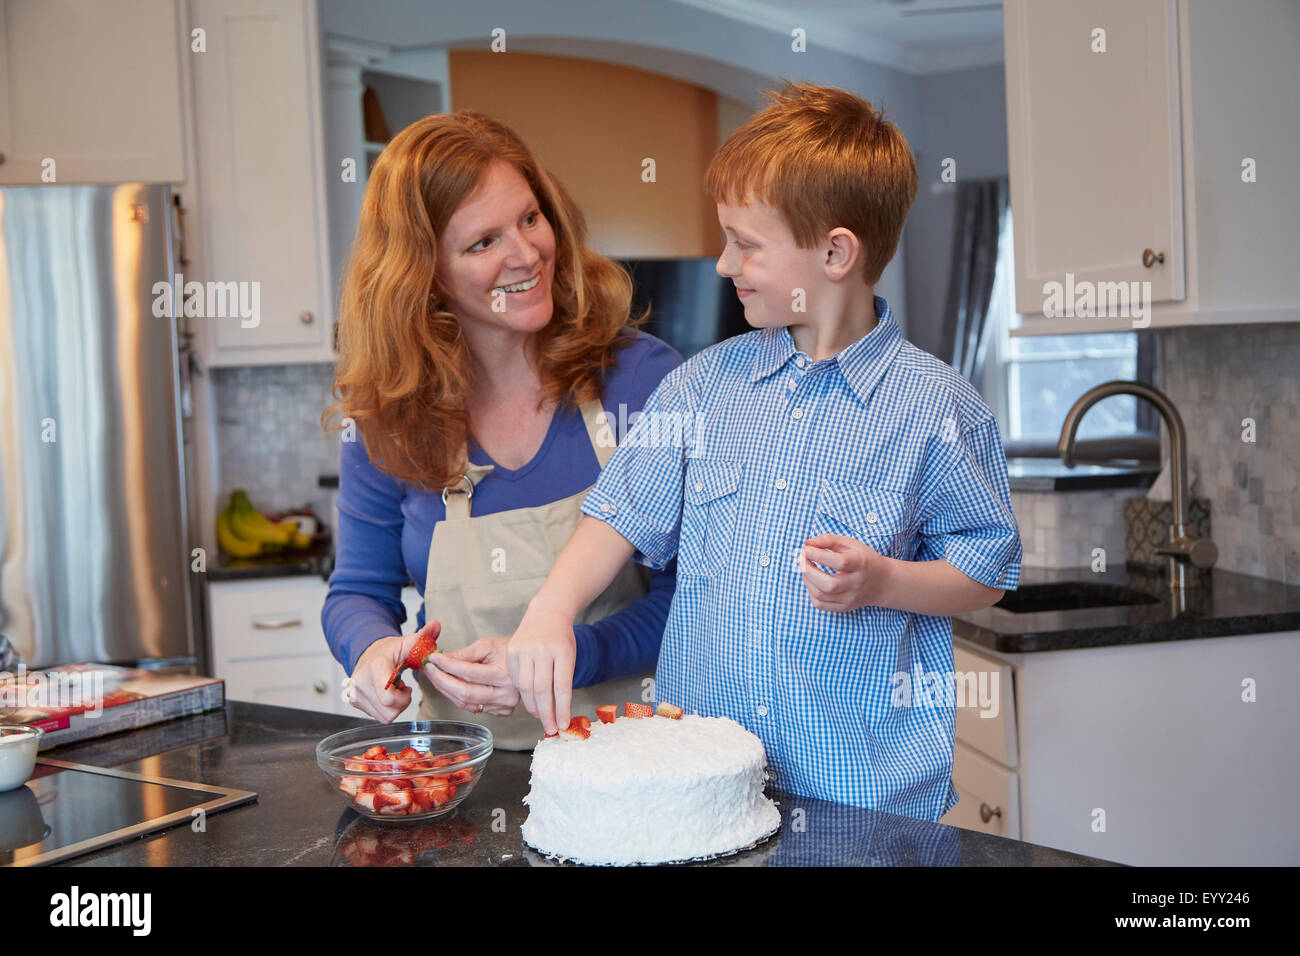 Caucasian mother and son decorating cake in kitchen Stock Photo